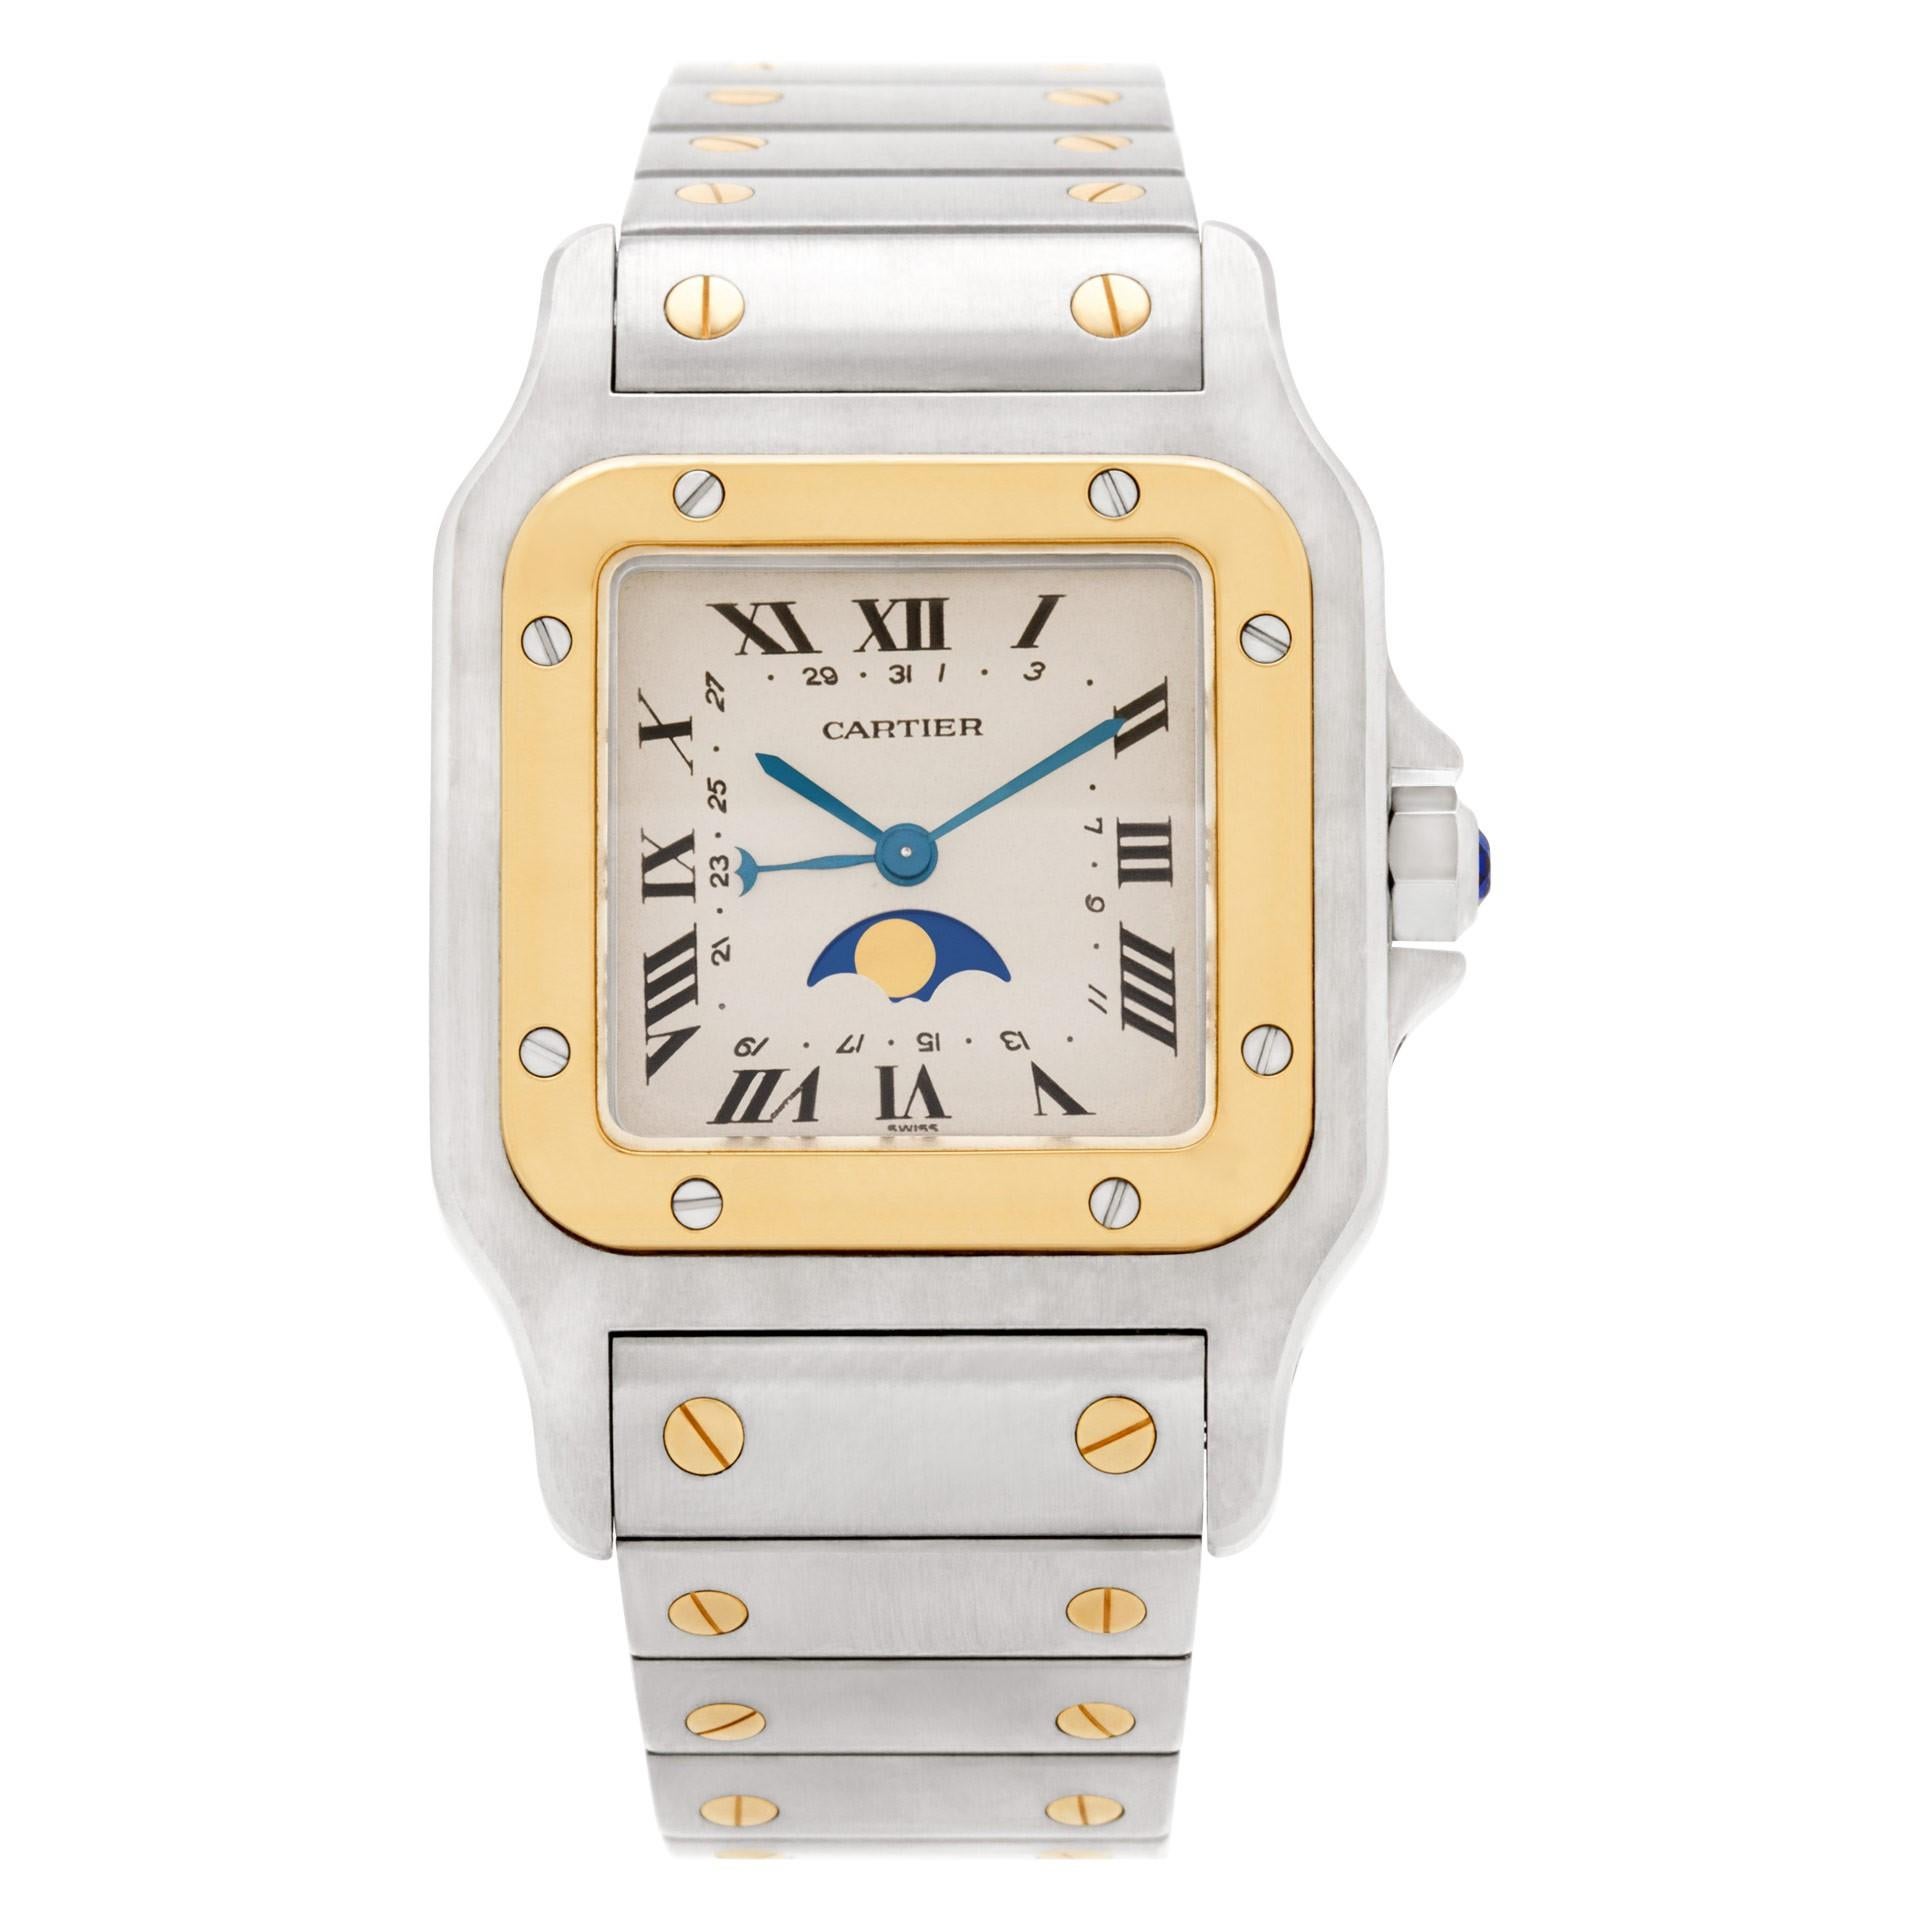 Cartier Santos de Cartier Reference #:119901. Stainless steel case and bracelet. Fixed, screwed 18K yellow gold bezel. Ivory / Cream dial with blue tone hands and Roman numeral hour markers. Date markers around the inner ring. Moon phase displays at